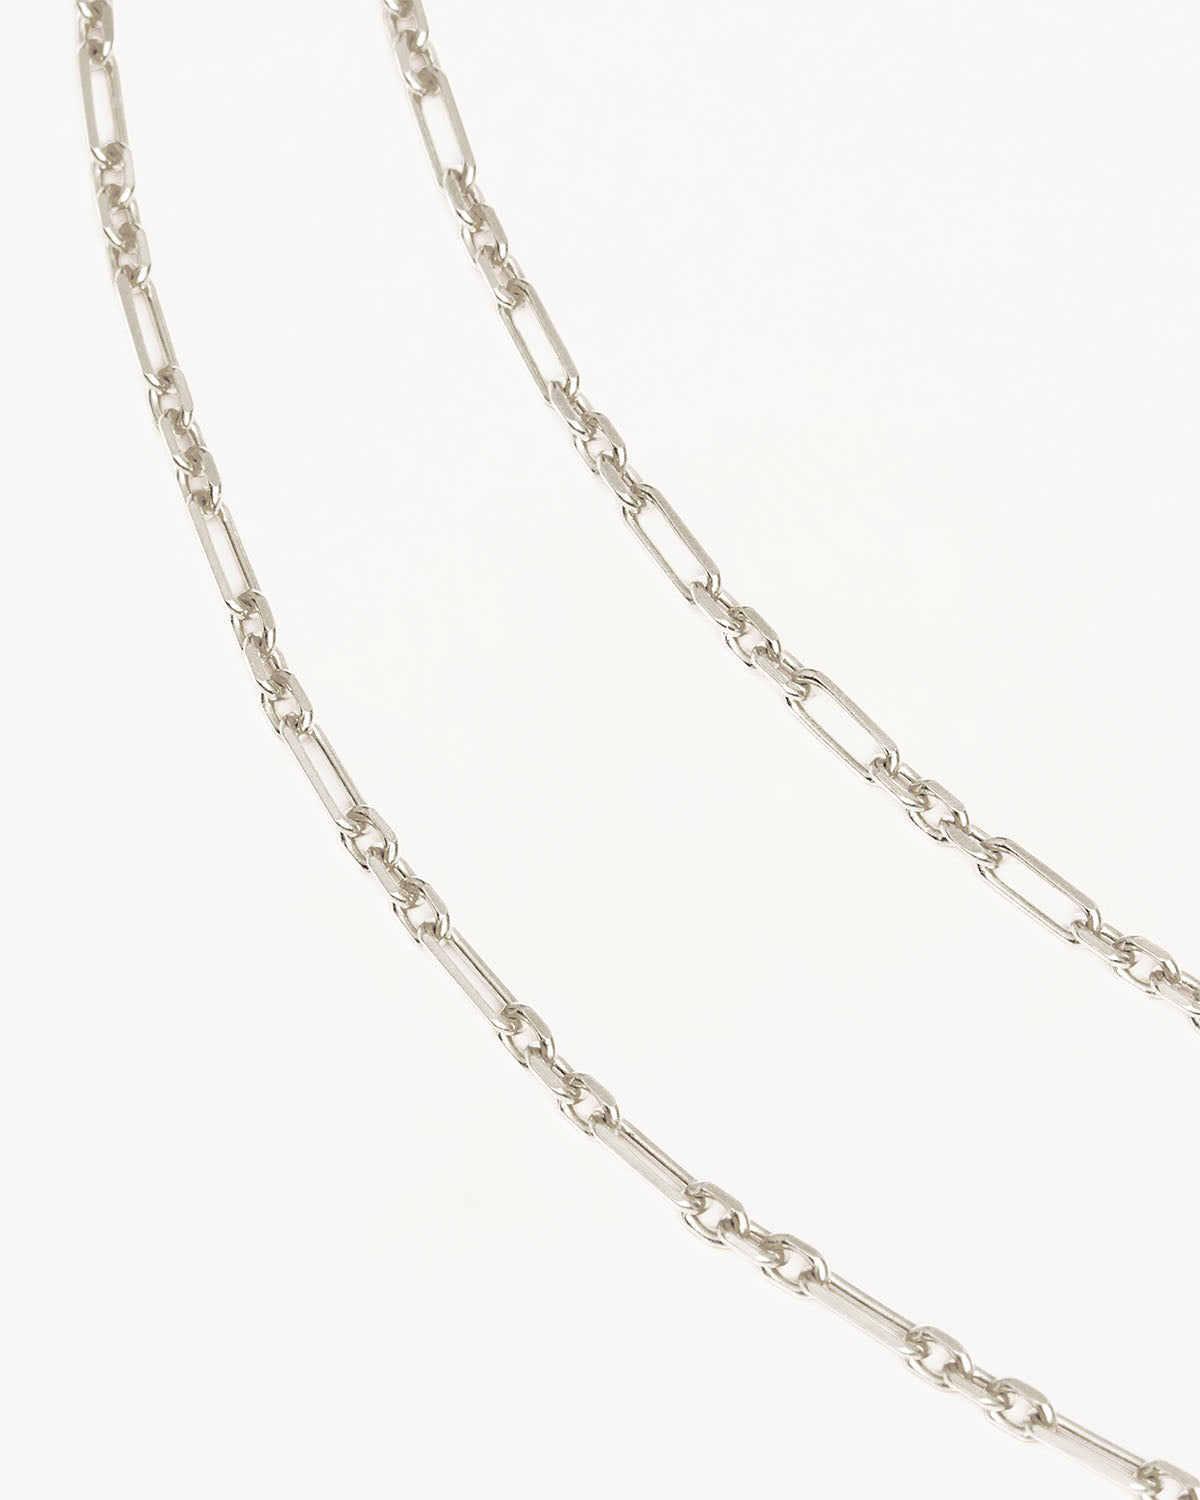 Buy Stainless Steel Chain Necklace/1.5mm Chain/necklace Chain Steel/chain  for Pendant/chain Necklace/20 Inch Chain/necklace Chain/18 Inch Online in  India - Etsy